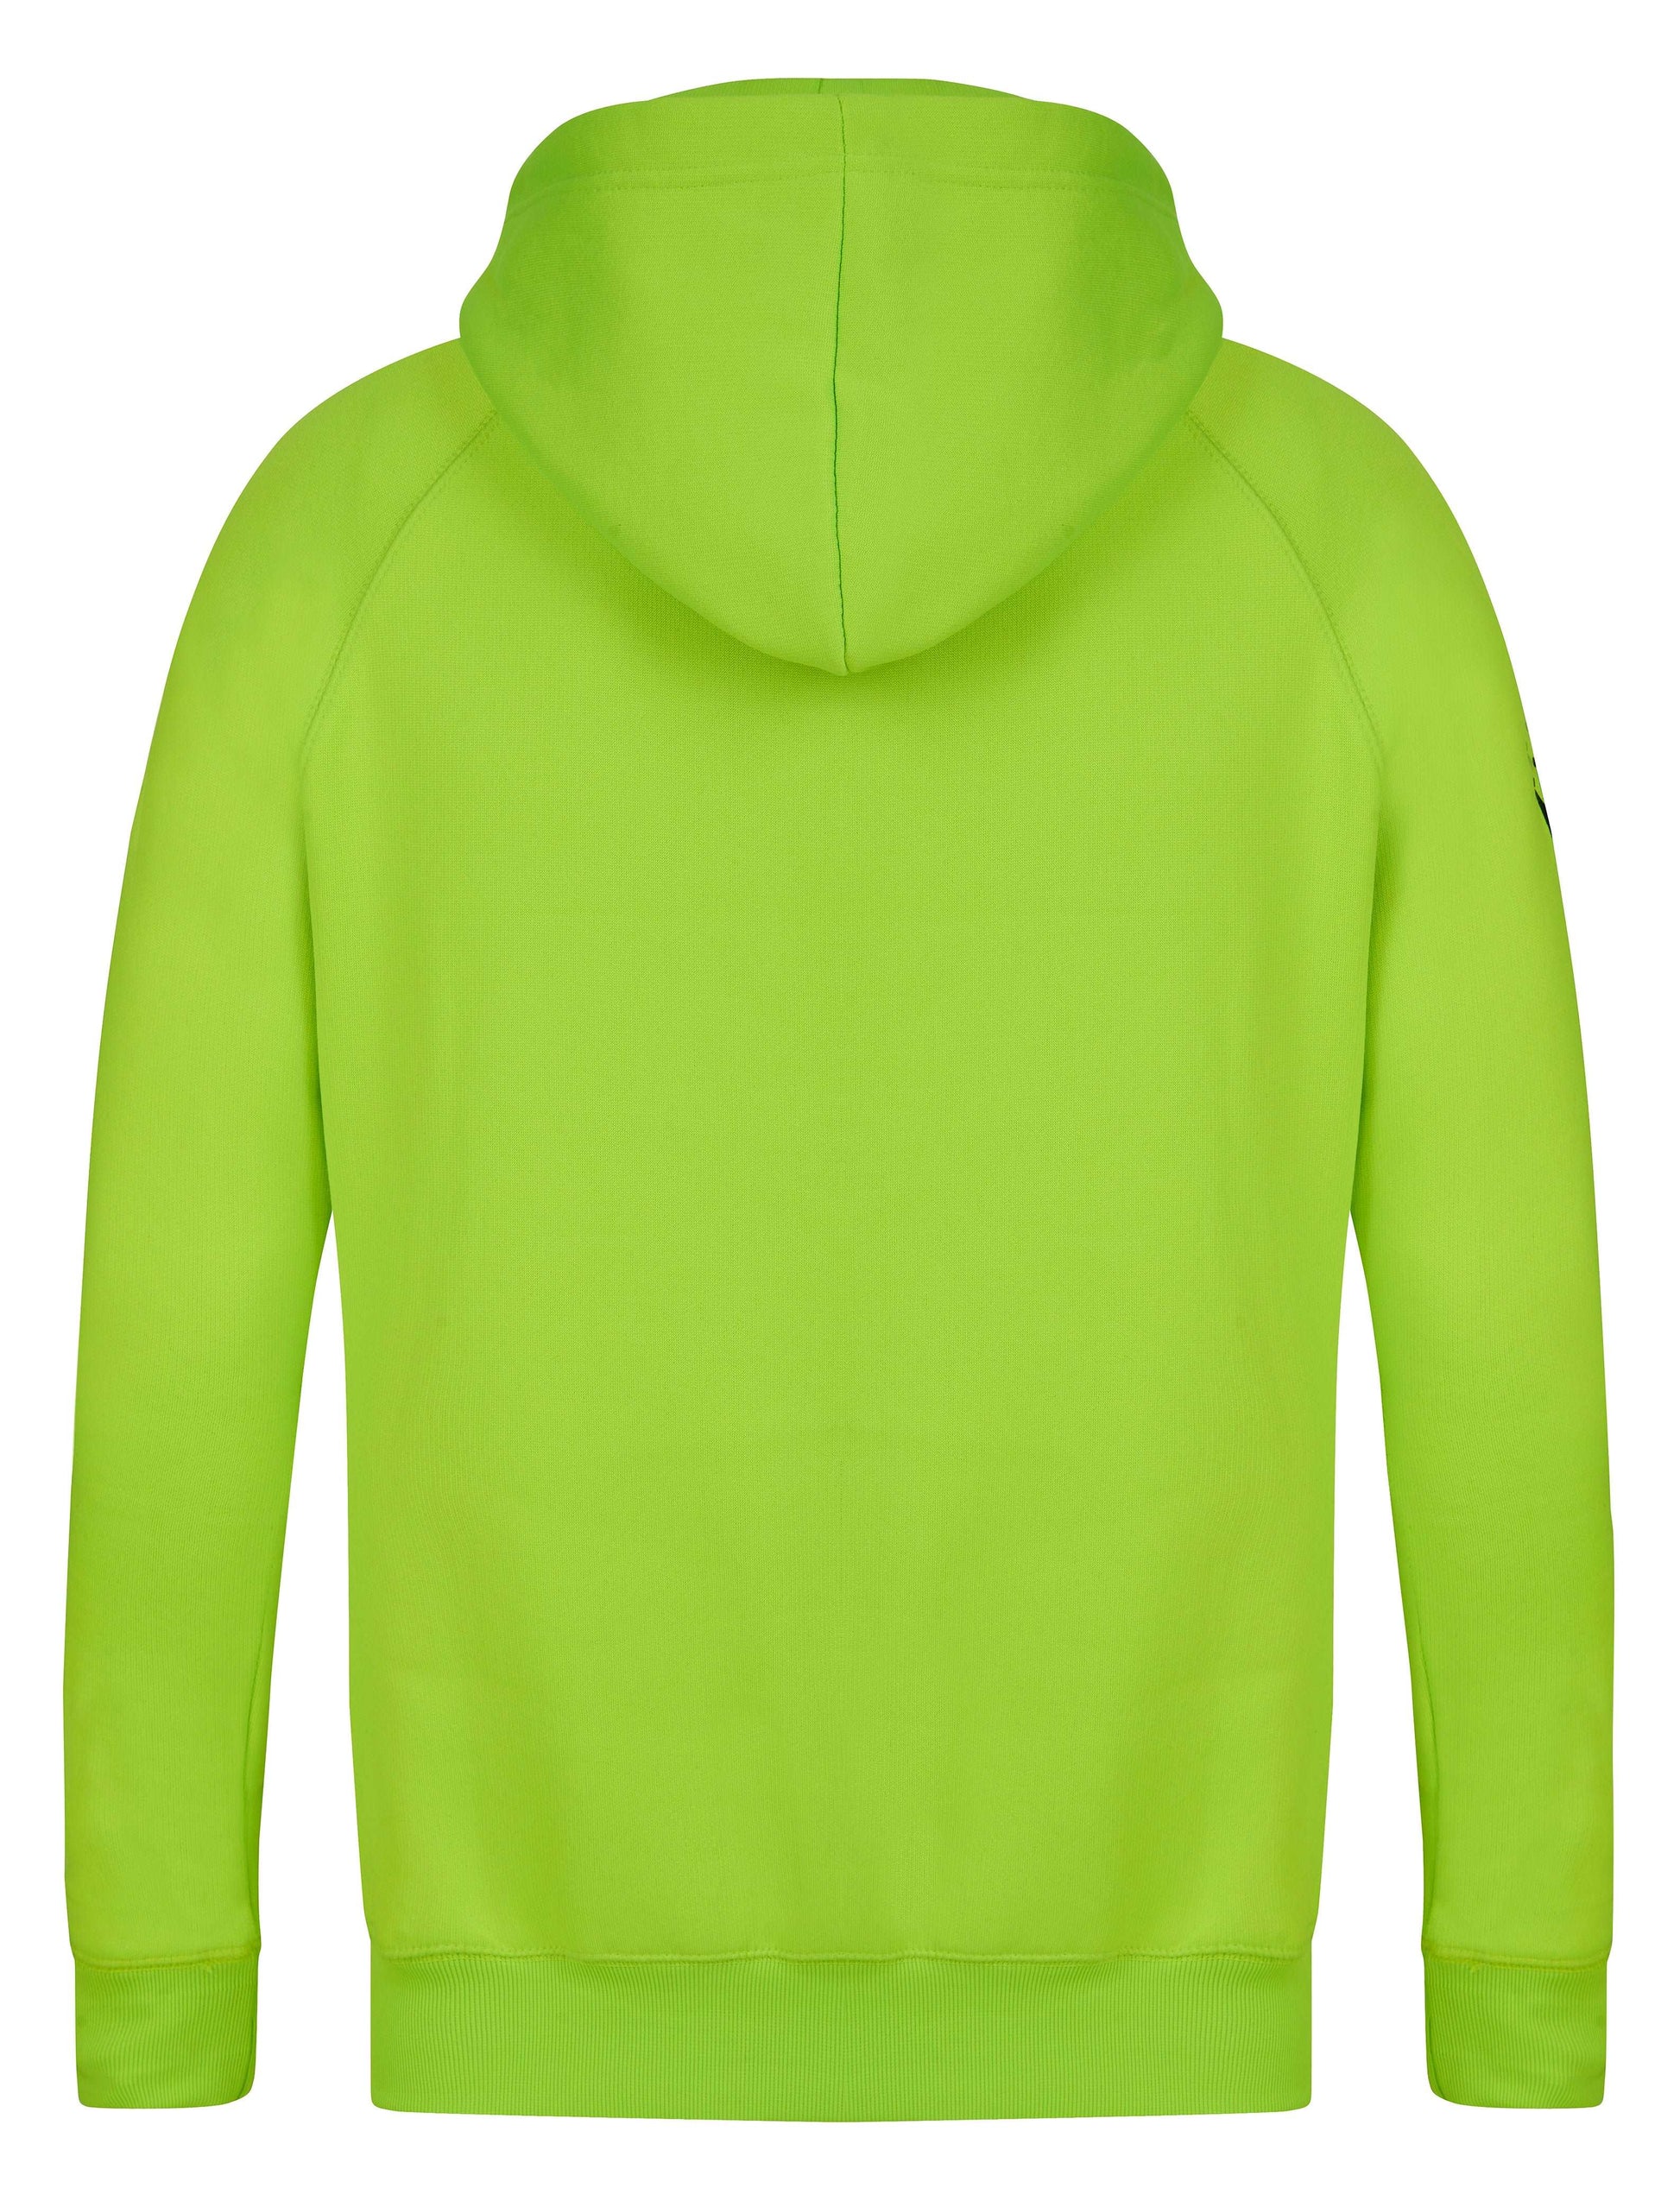 YUNG'N'RICH HOODIE - colour Neon Green with black rubber Yungnrich logo back view 